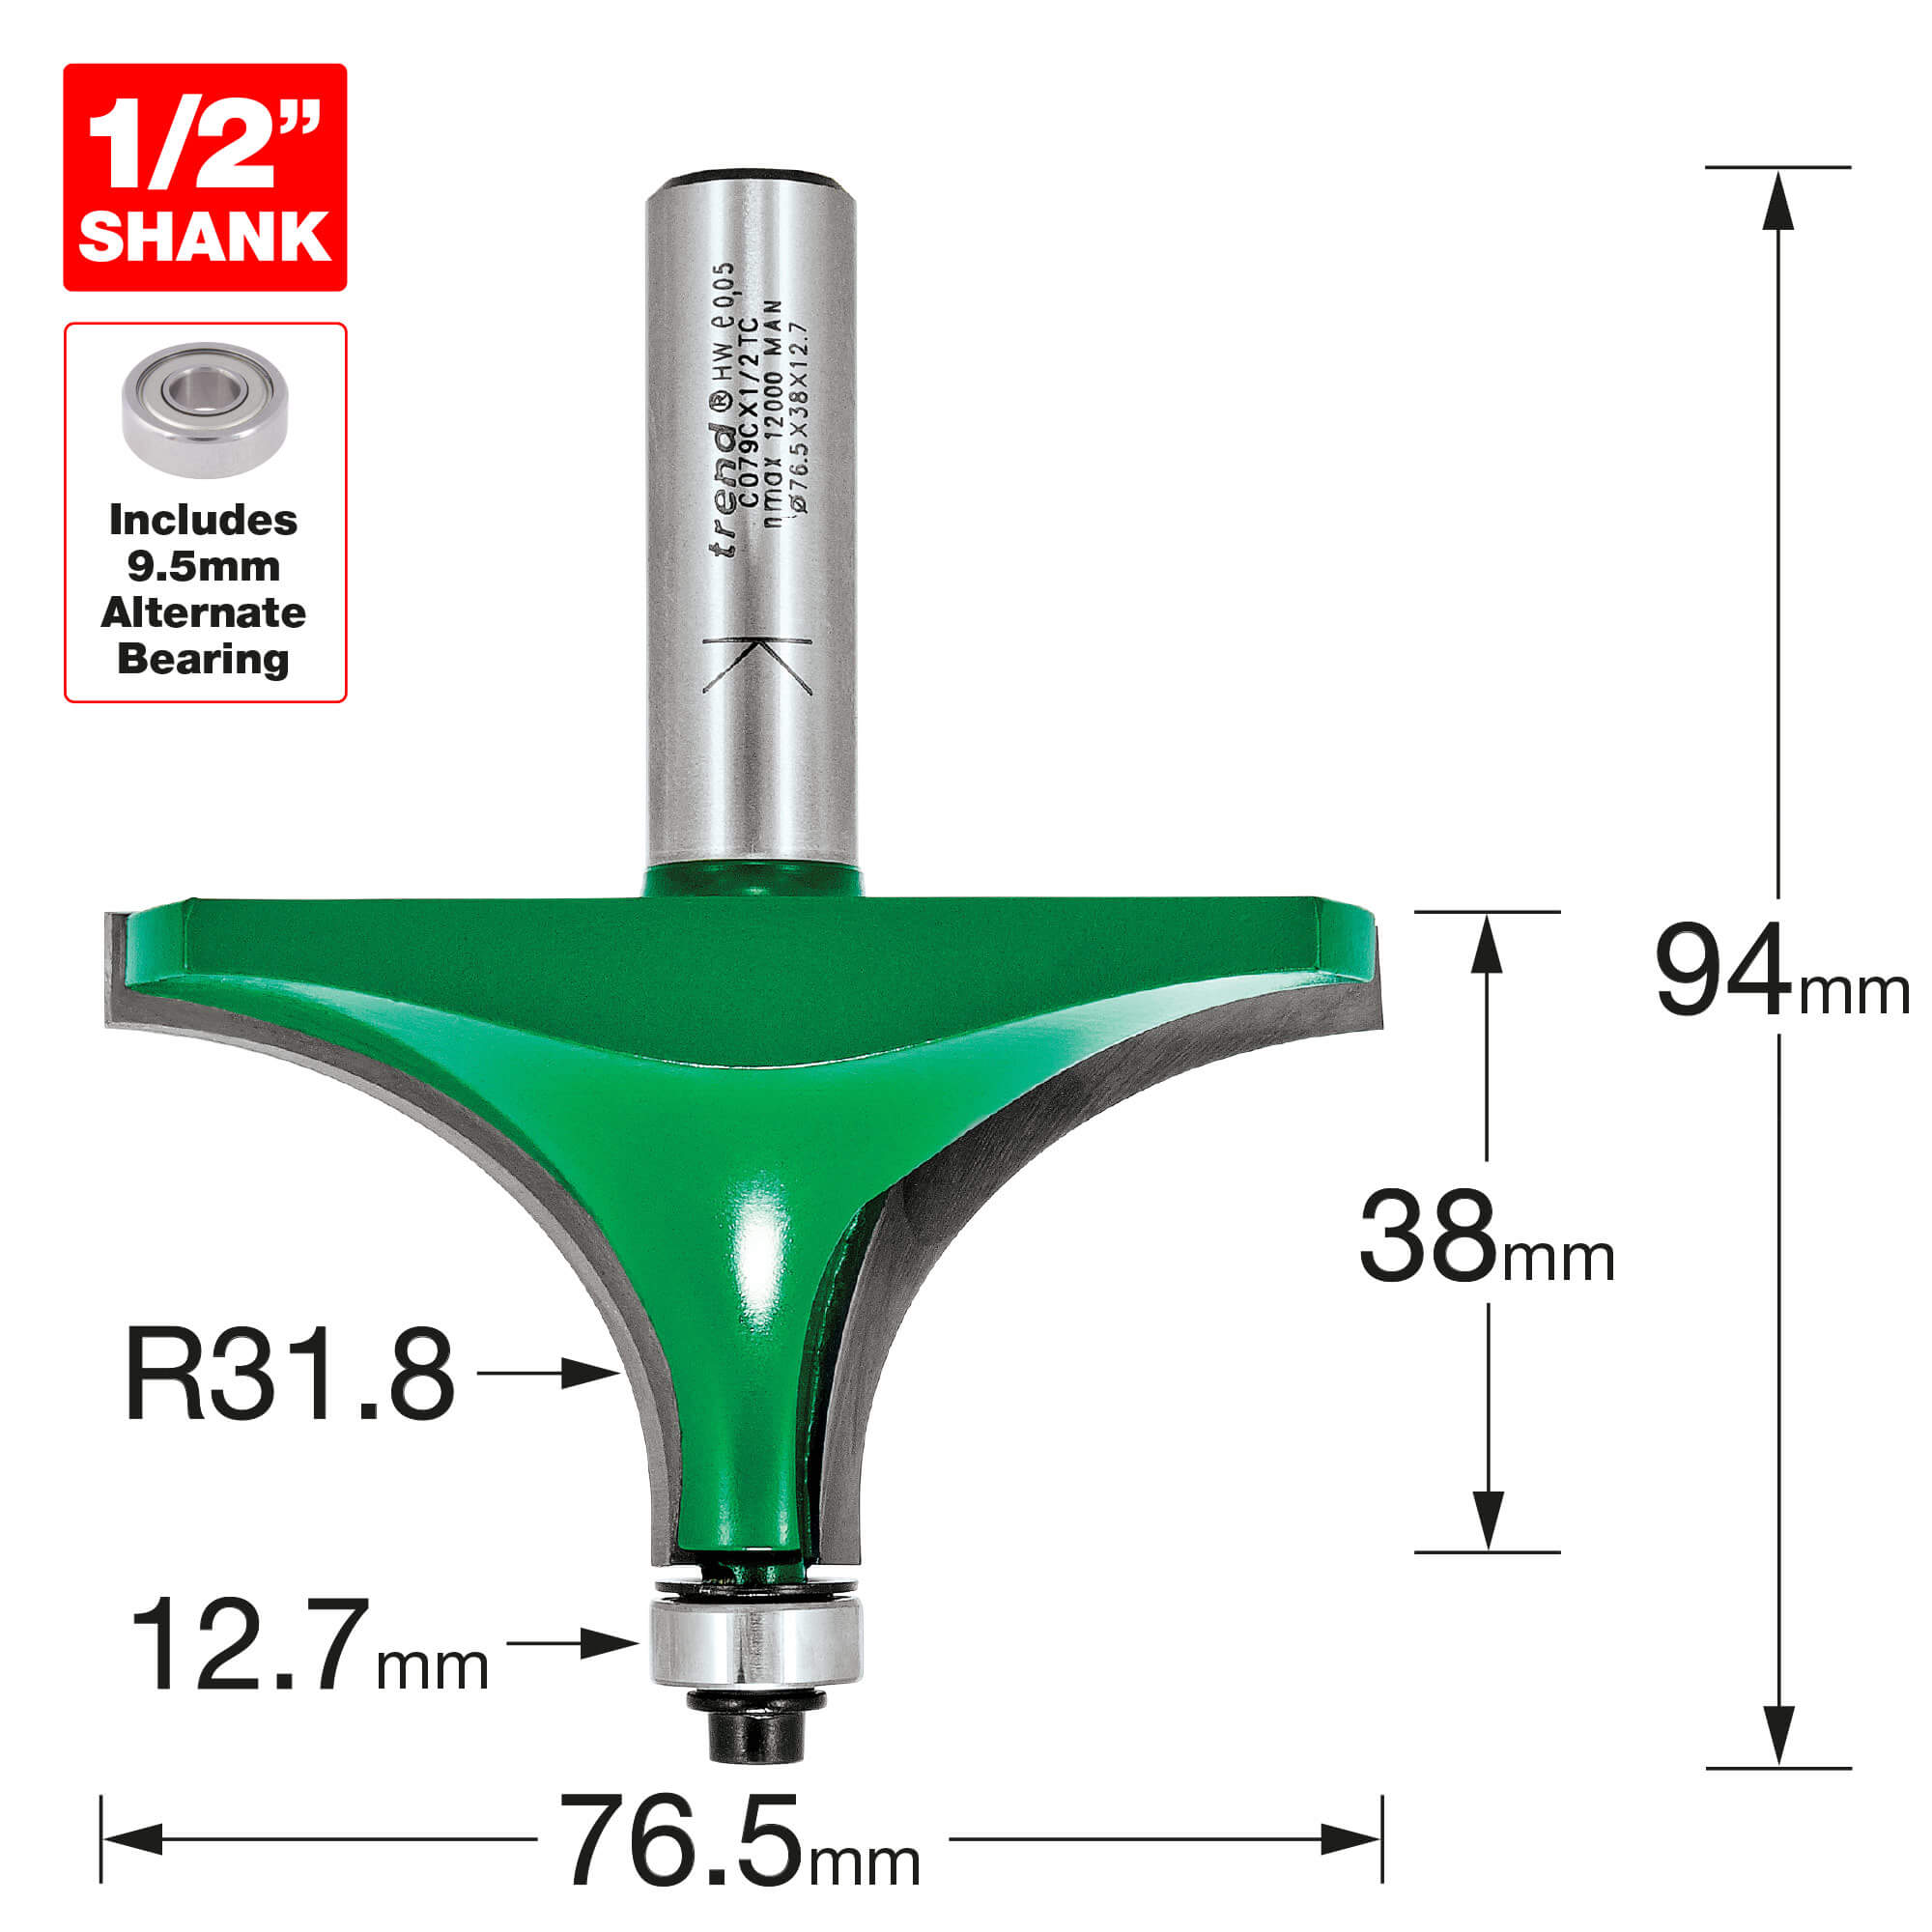 Image of Trend CraftPro Bearing Guided Round Over and Ovolo Router Cutter 76.5mm 38mm 1/2"